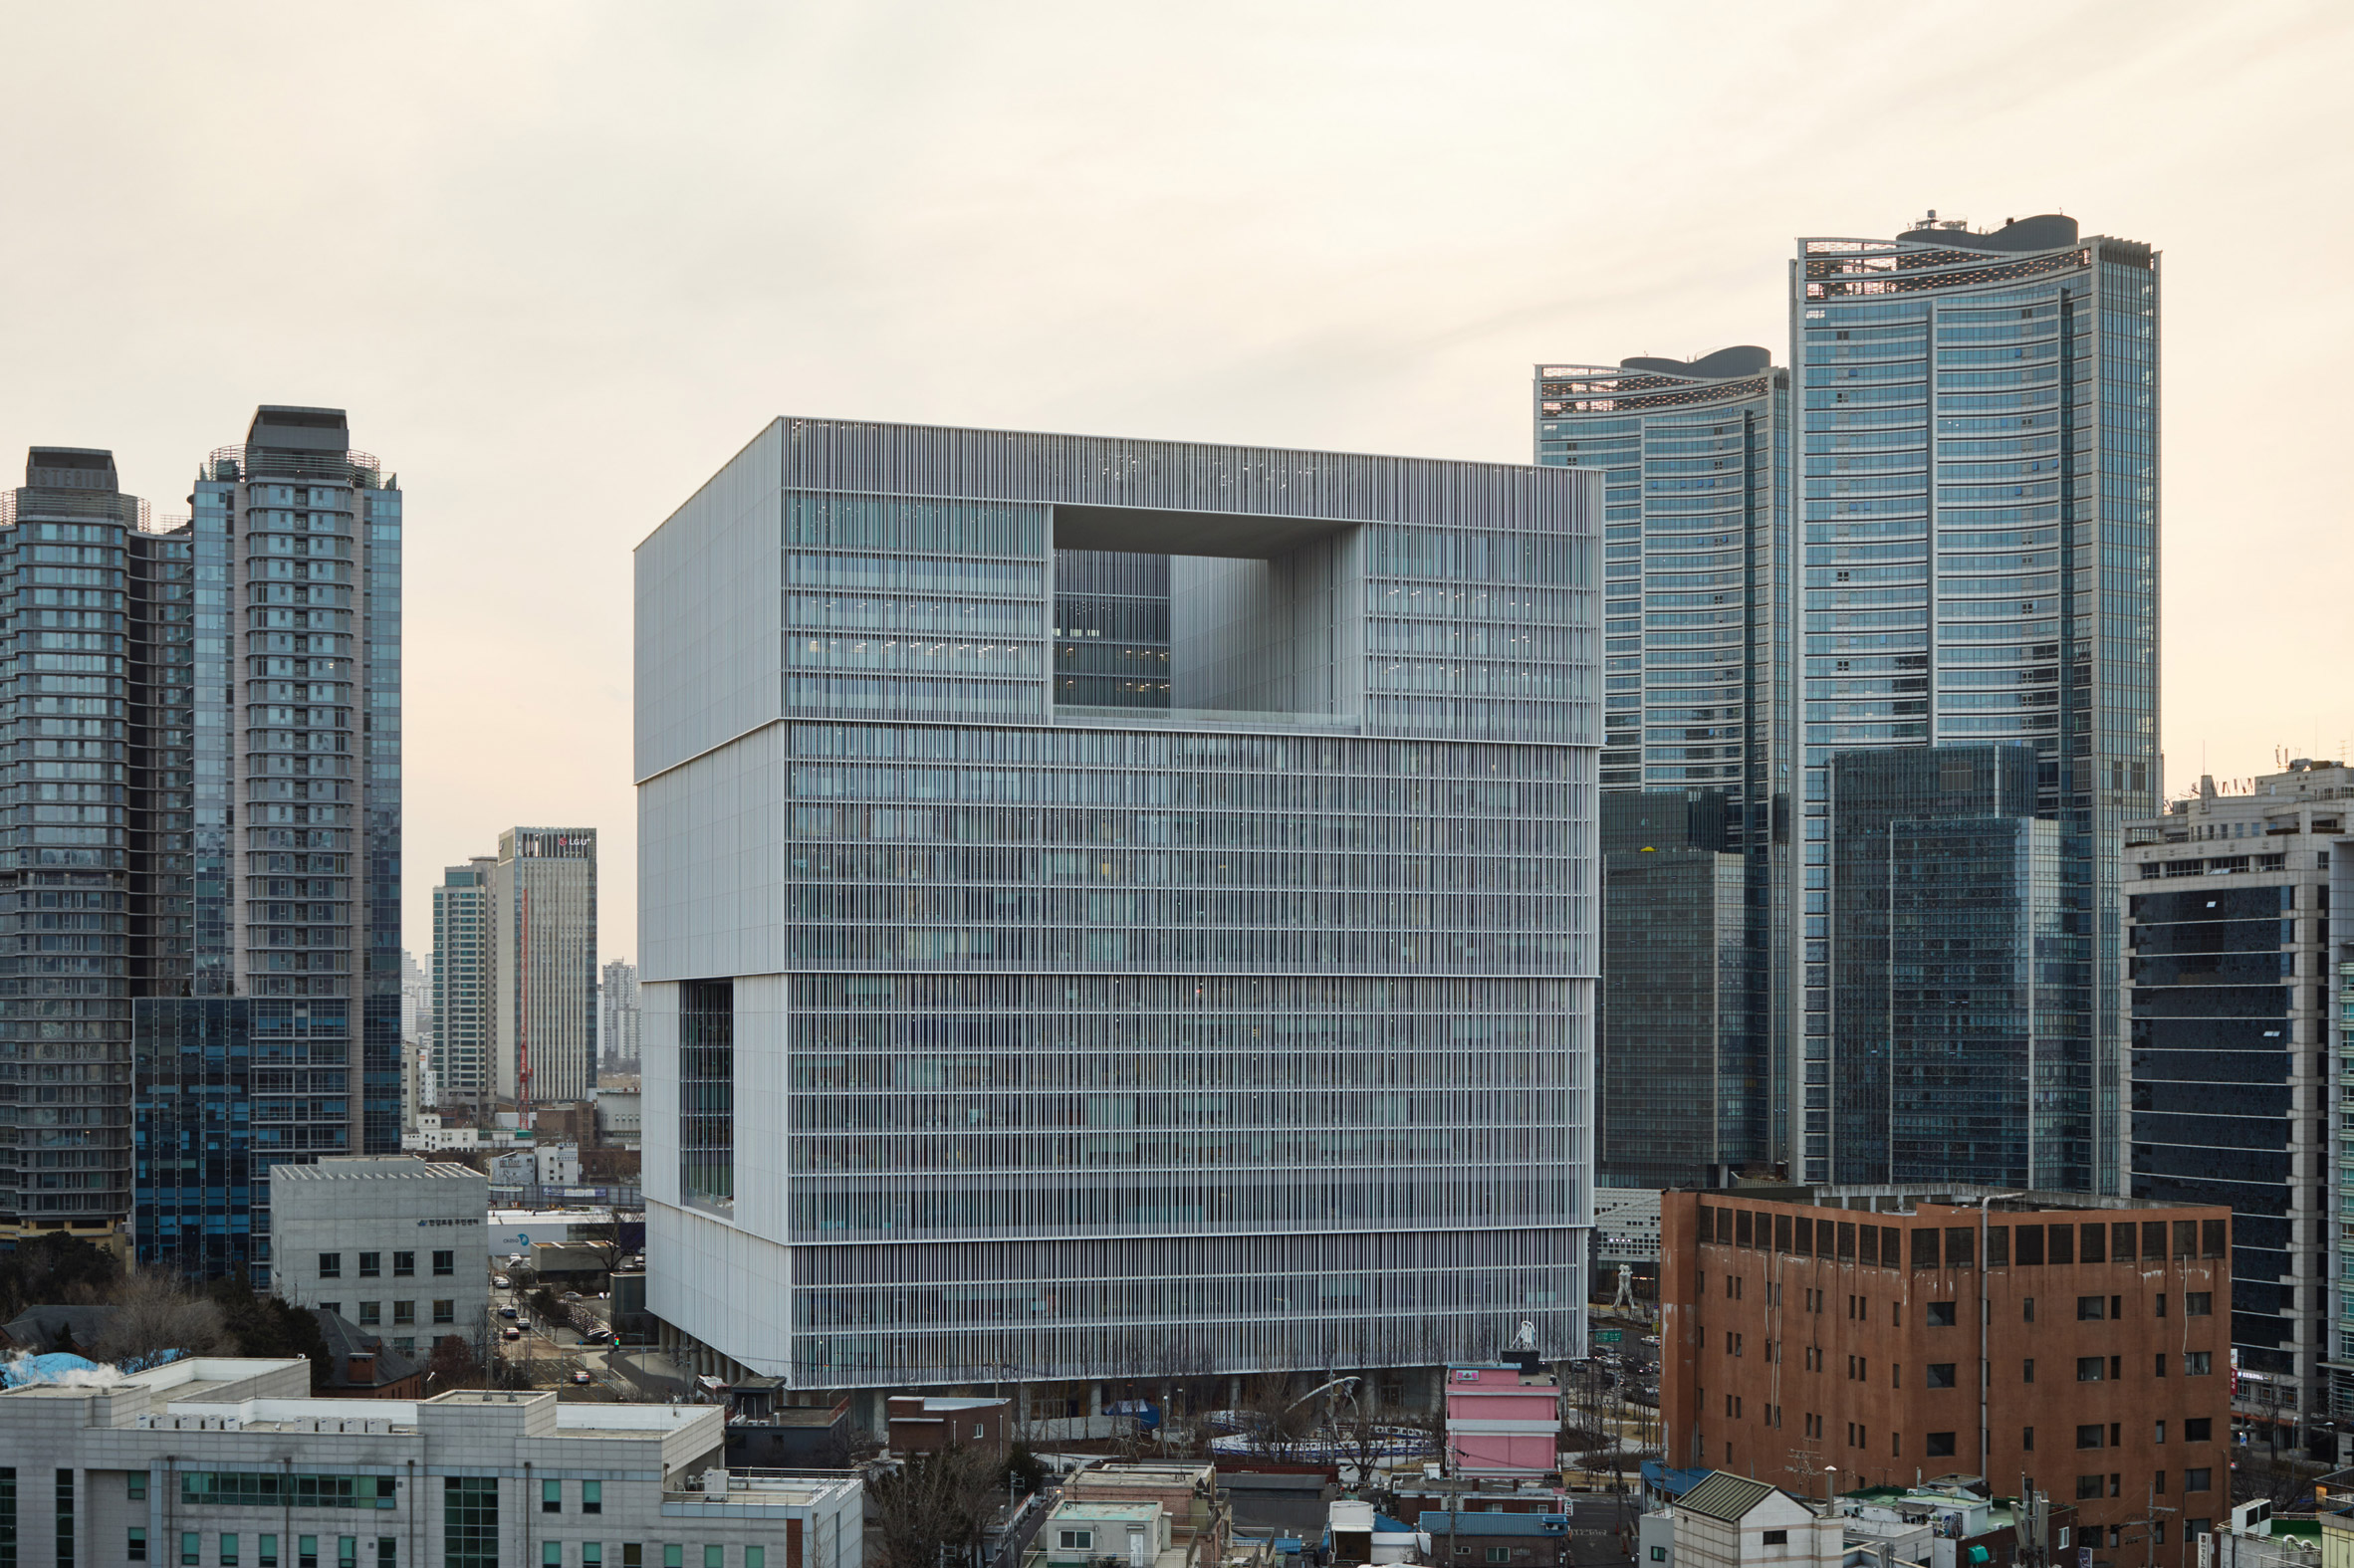 Amorepacific headquarters by David Chipperfield Architects